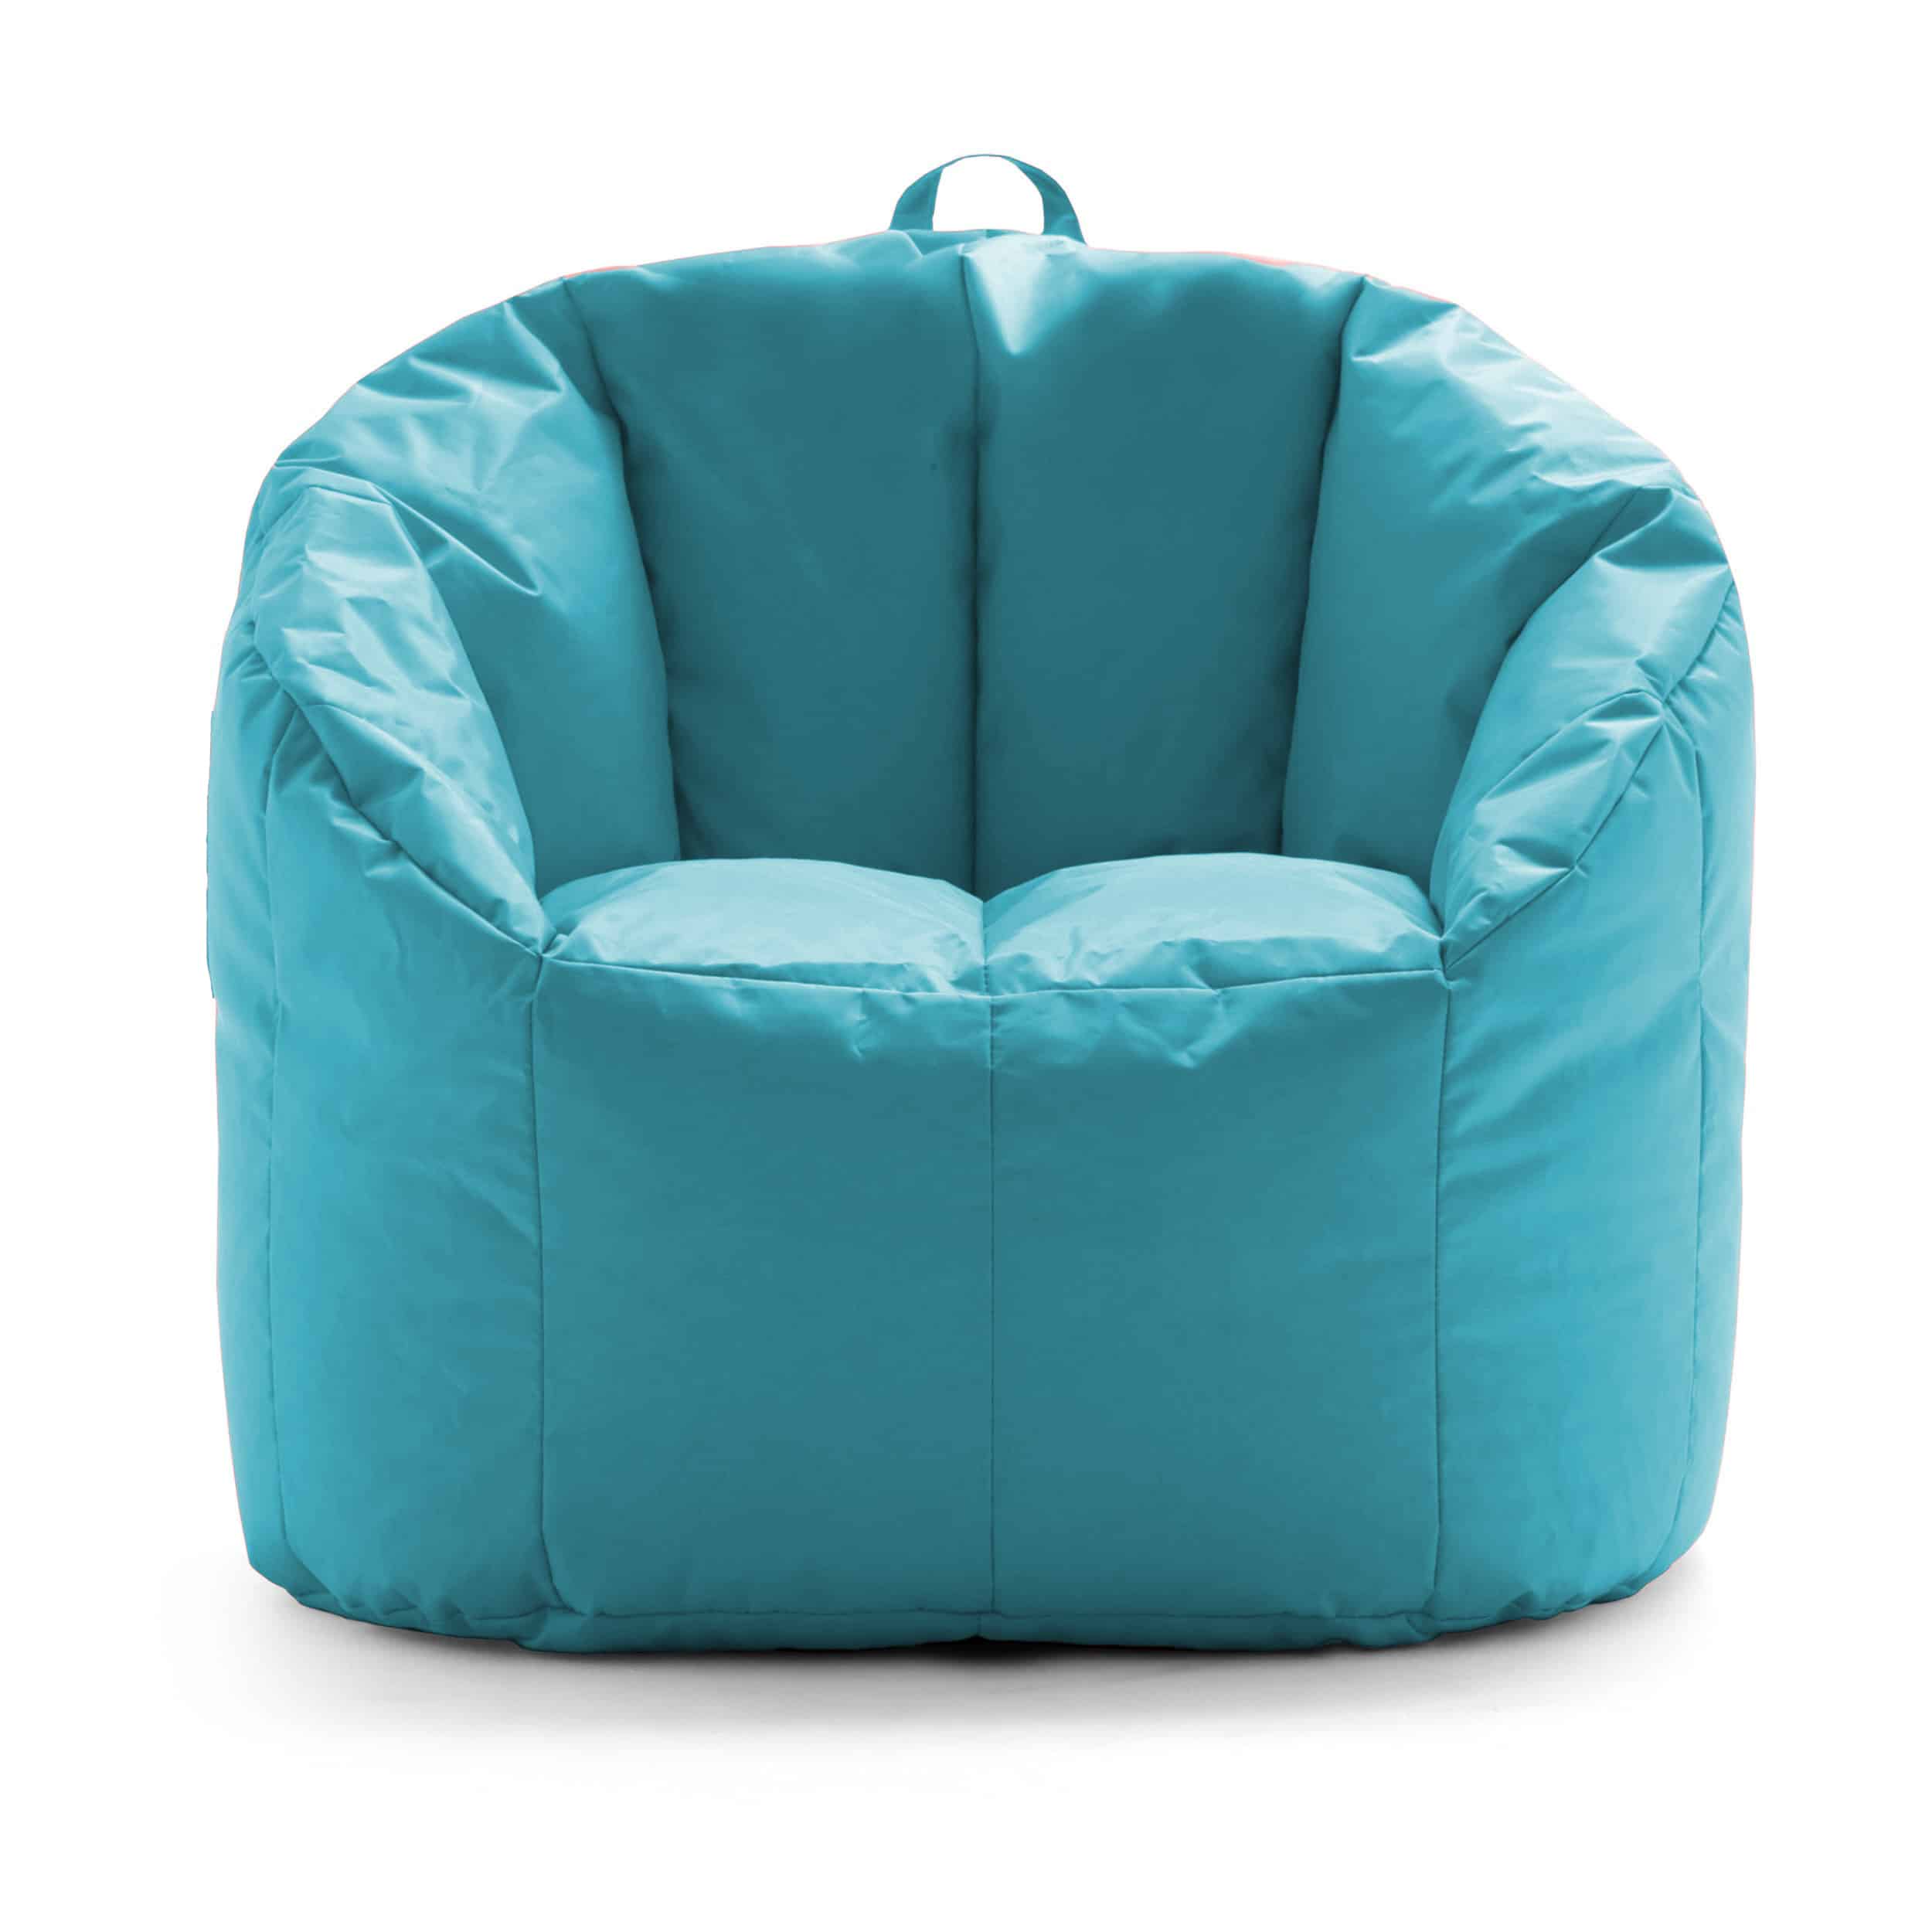 Turquoise Armchair Outdoor Bean bag buy online | Affordable Prices